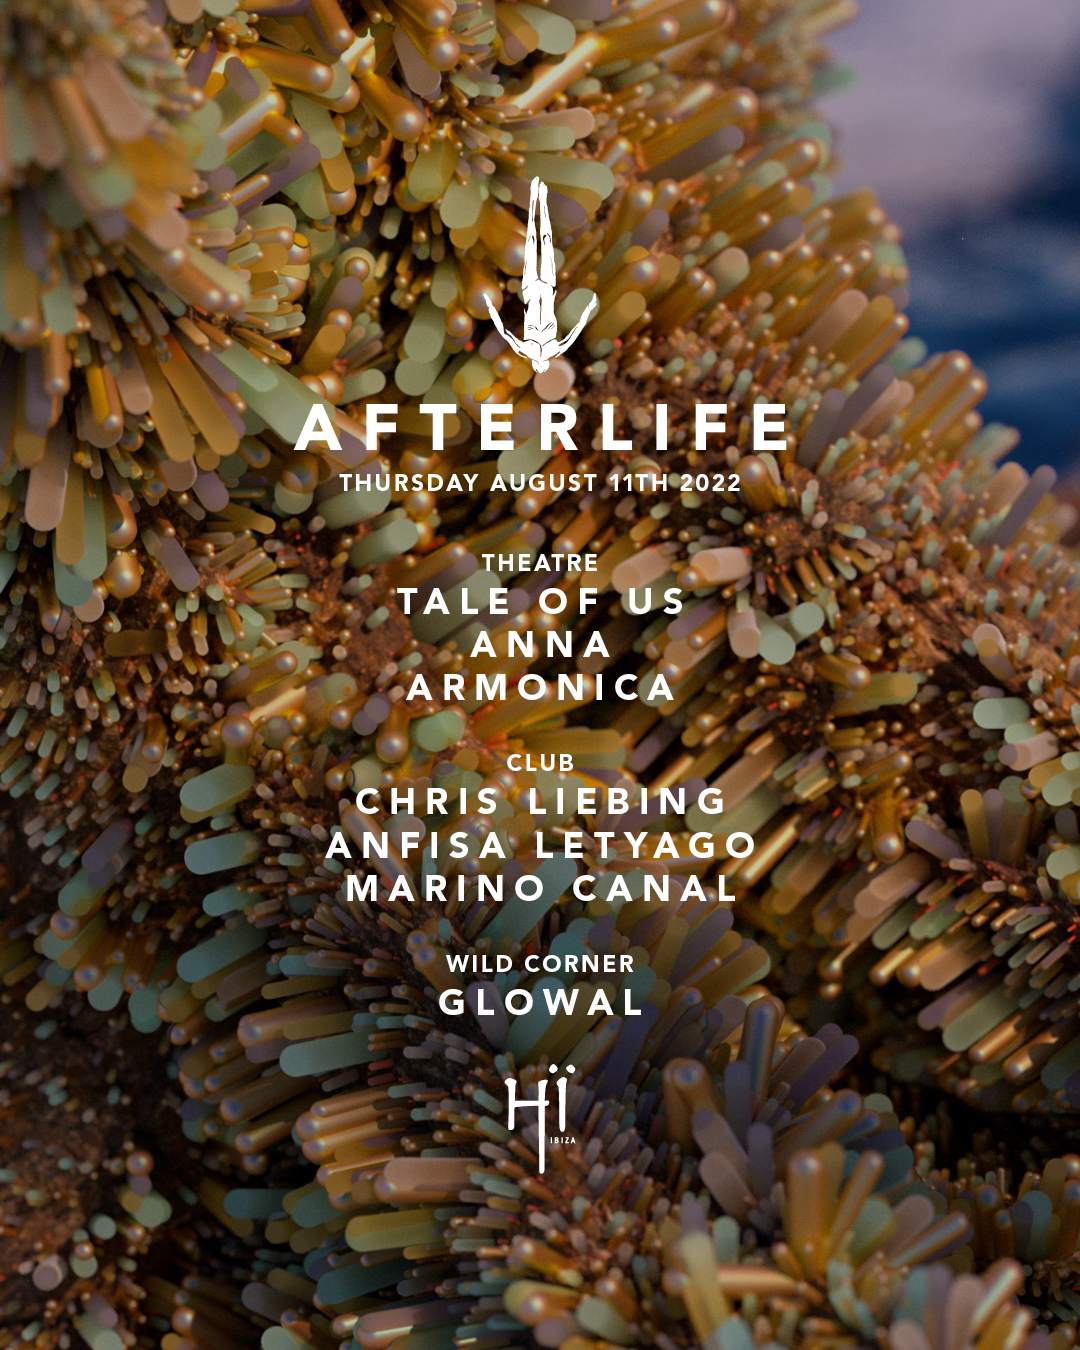 Tale Of Us reveals lineup for Afterlife Zamna Tulum 2022